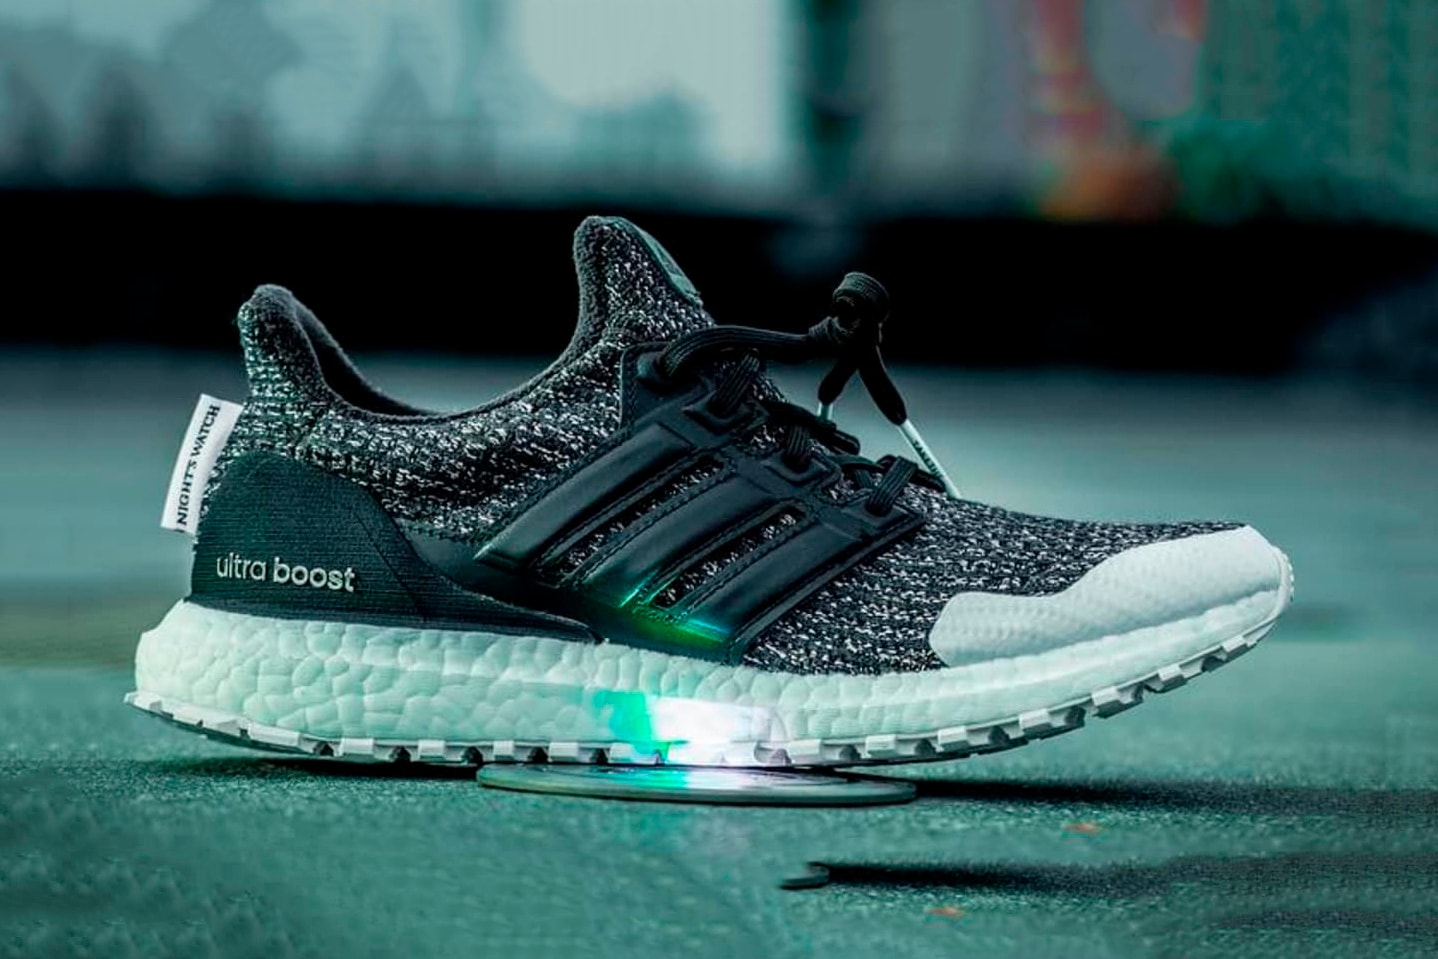 First Look at the 'Night's Watch' Ultra Boost